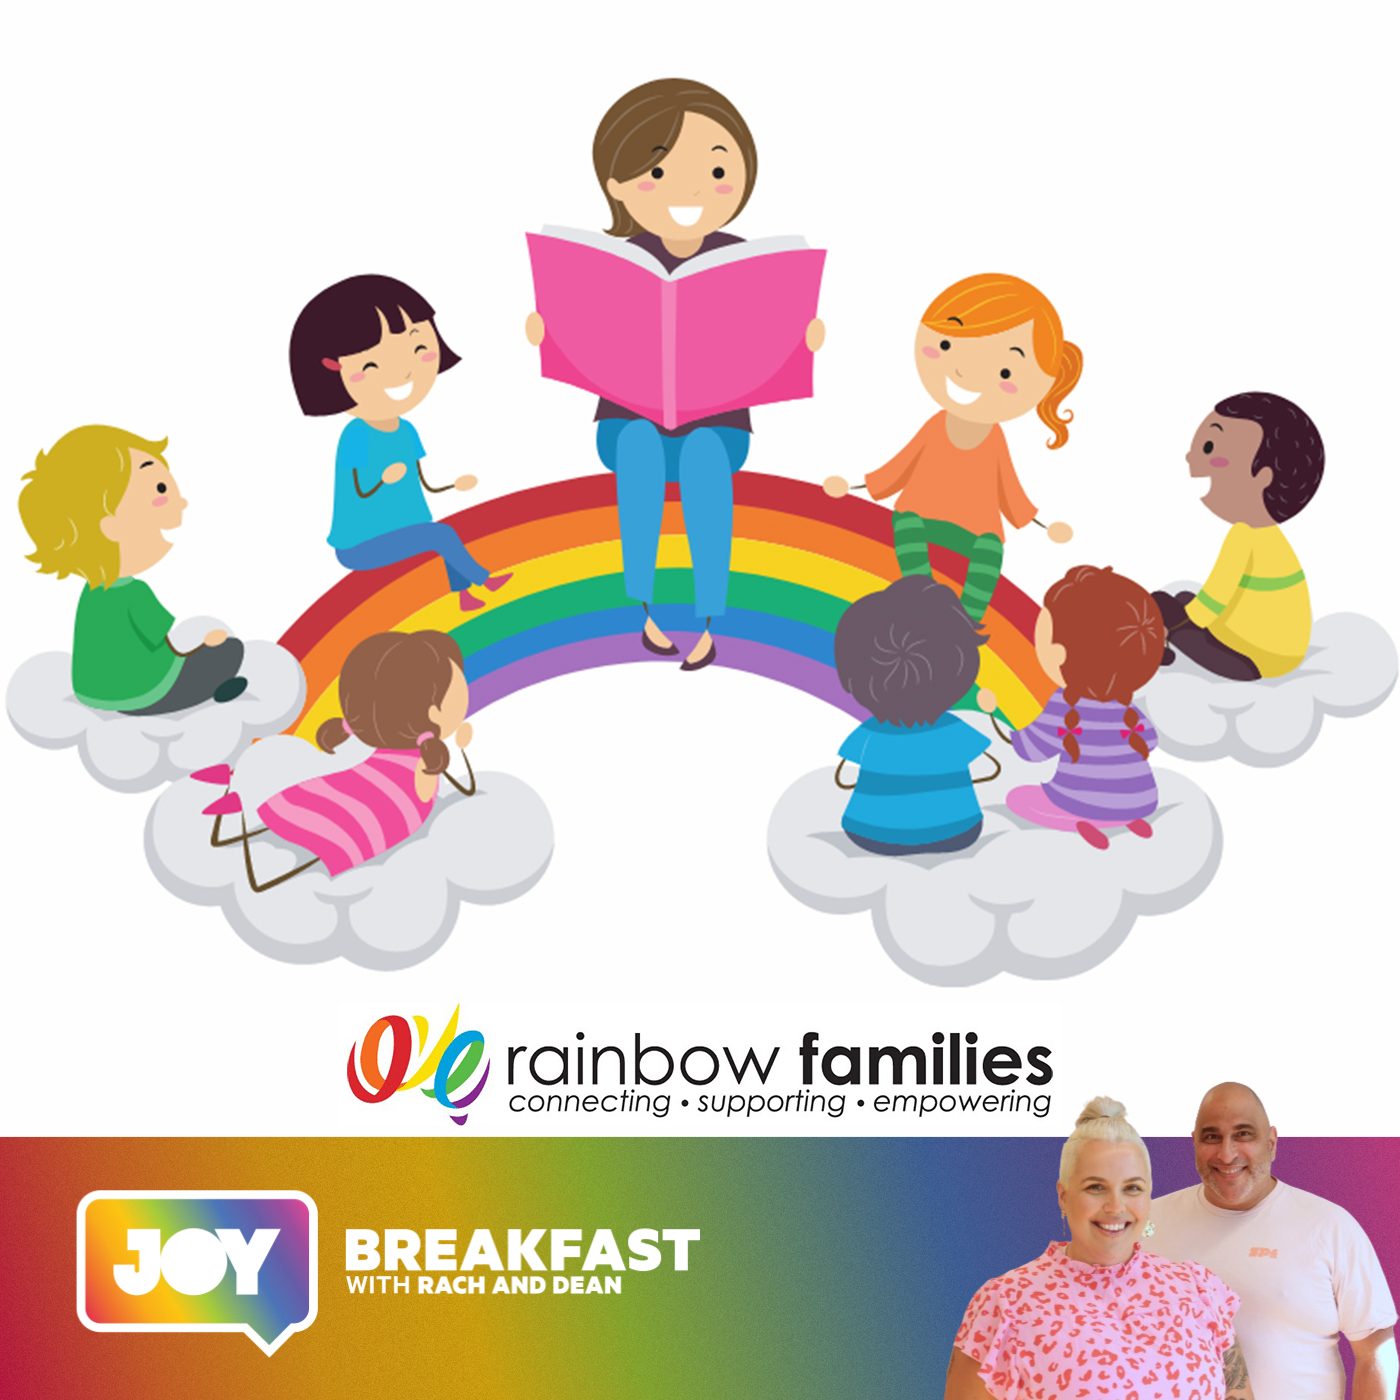 Rainbow Families, making a difference for all families